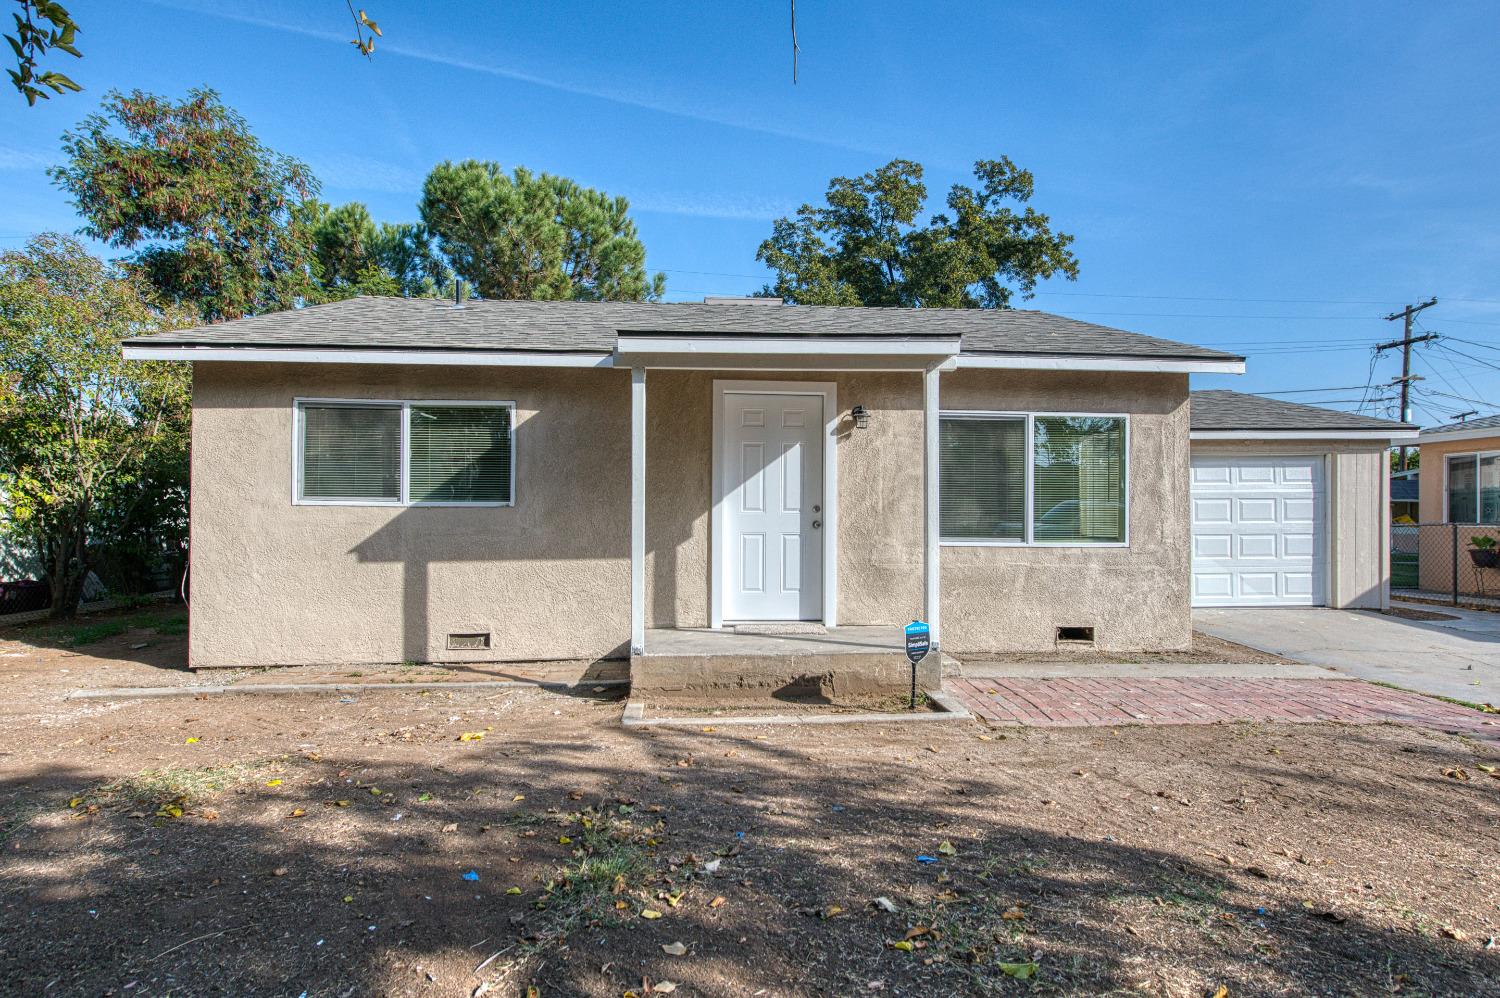 Photo of 2485 S Page Ave in Fresno, CA